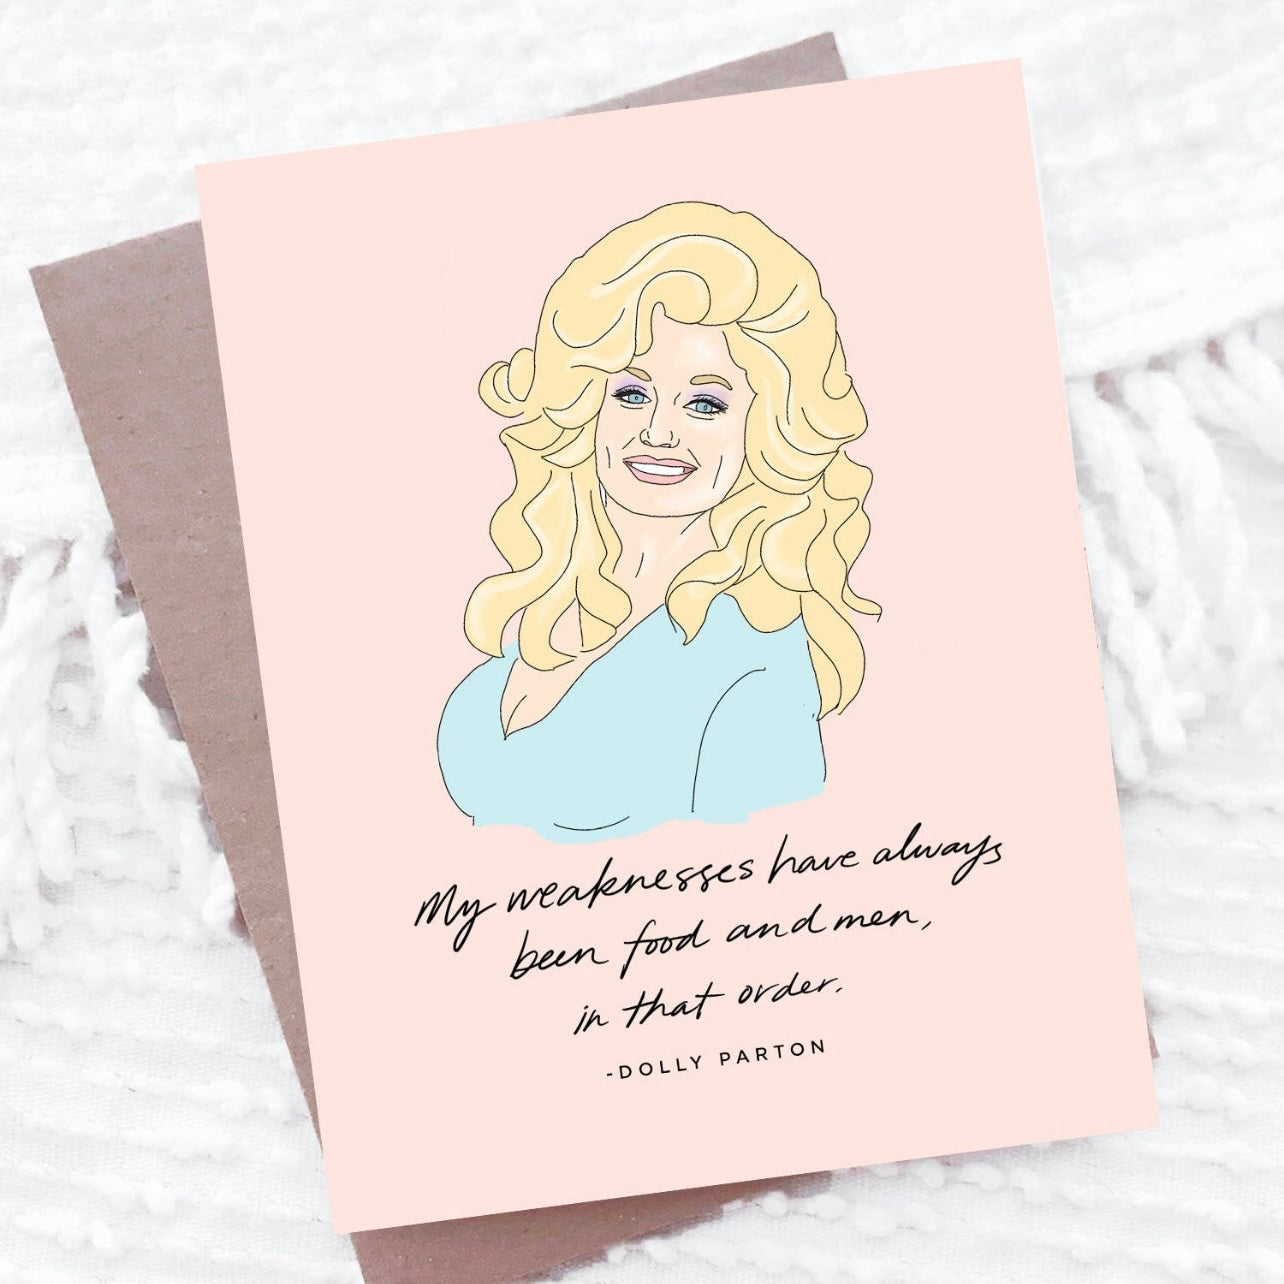 Madden & Co Greeting Card